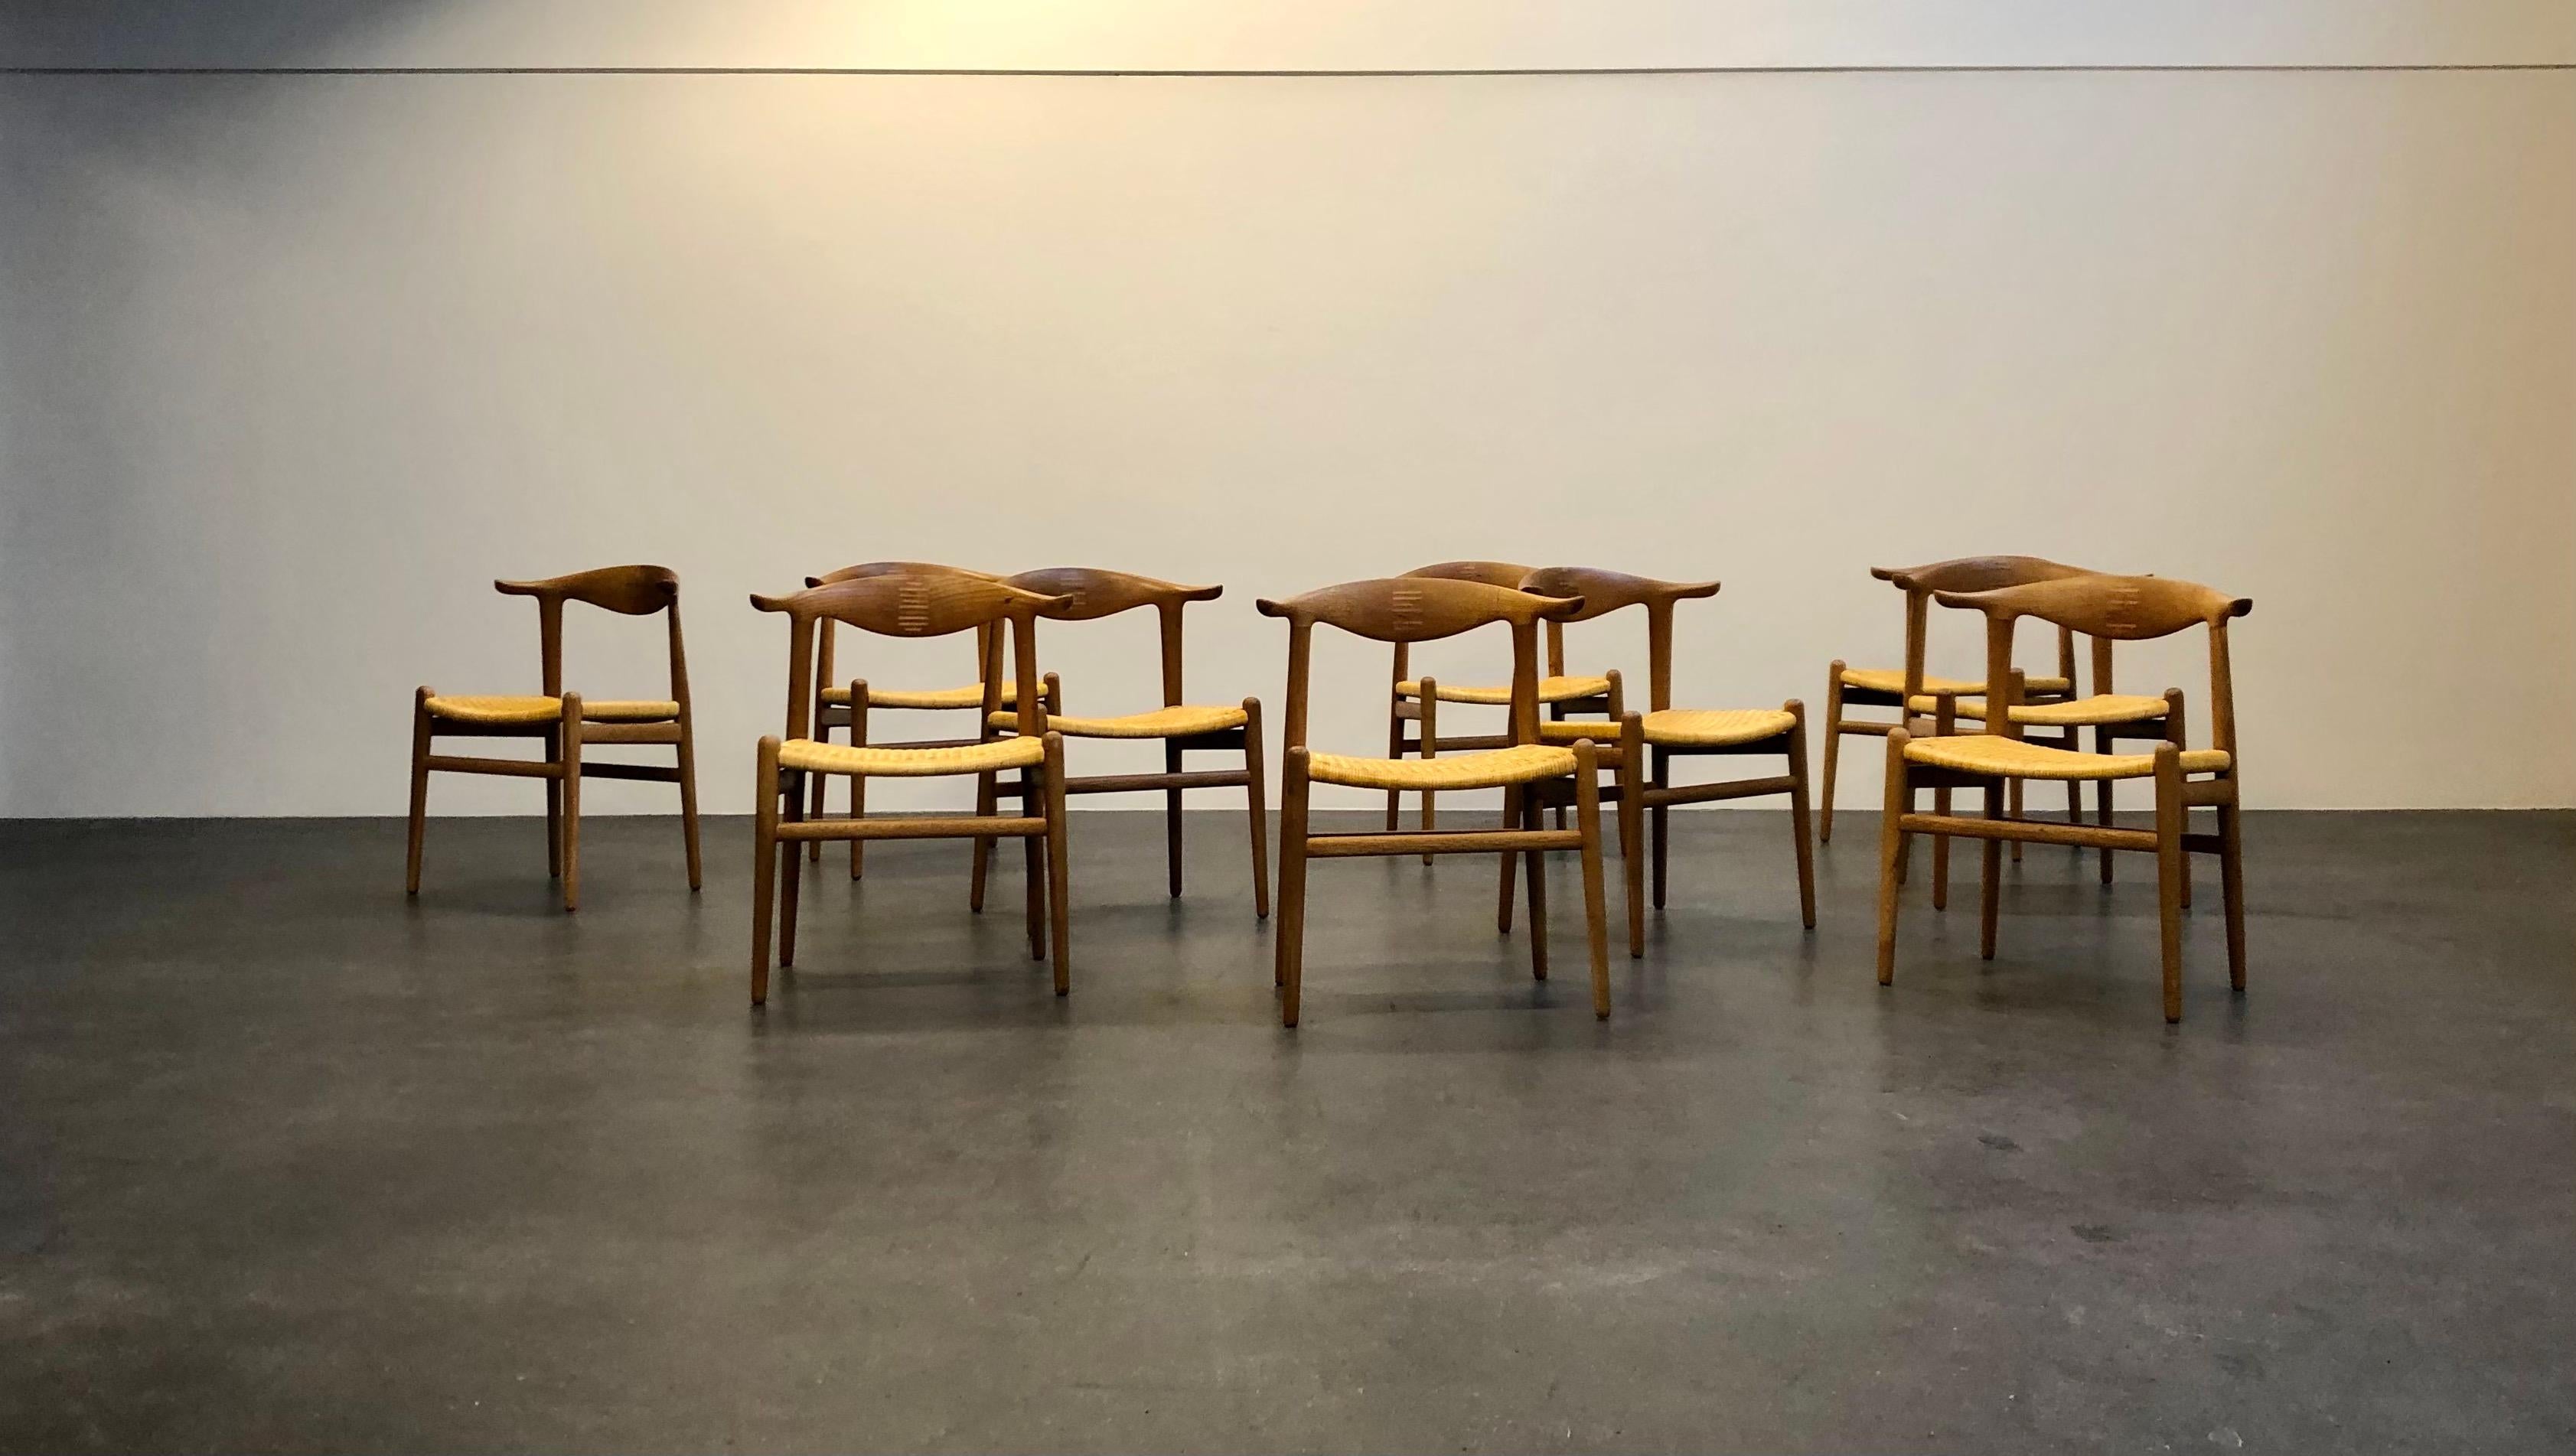 Hans Wegner set of 10 'Cow Horn' chairs in oak and cane for Johannes Hansen.

This chair was designed in 1952 and exhibited at the same year at the 'Copenhagen Cabinetmakers’ Guild' exhibition.